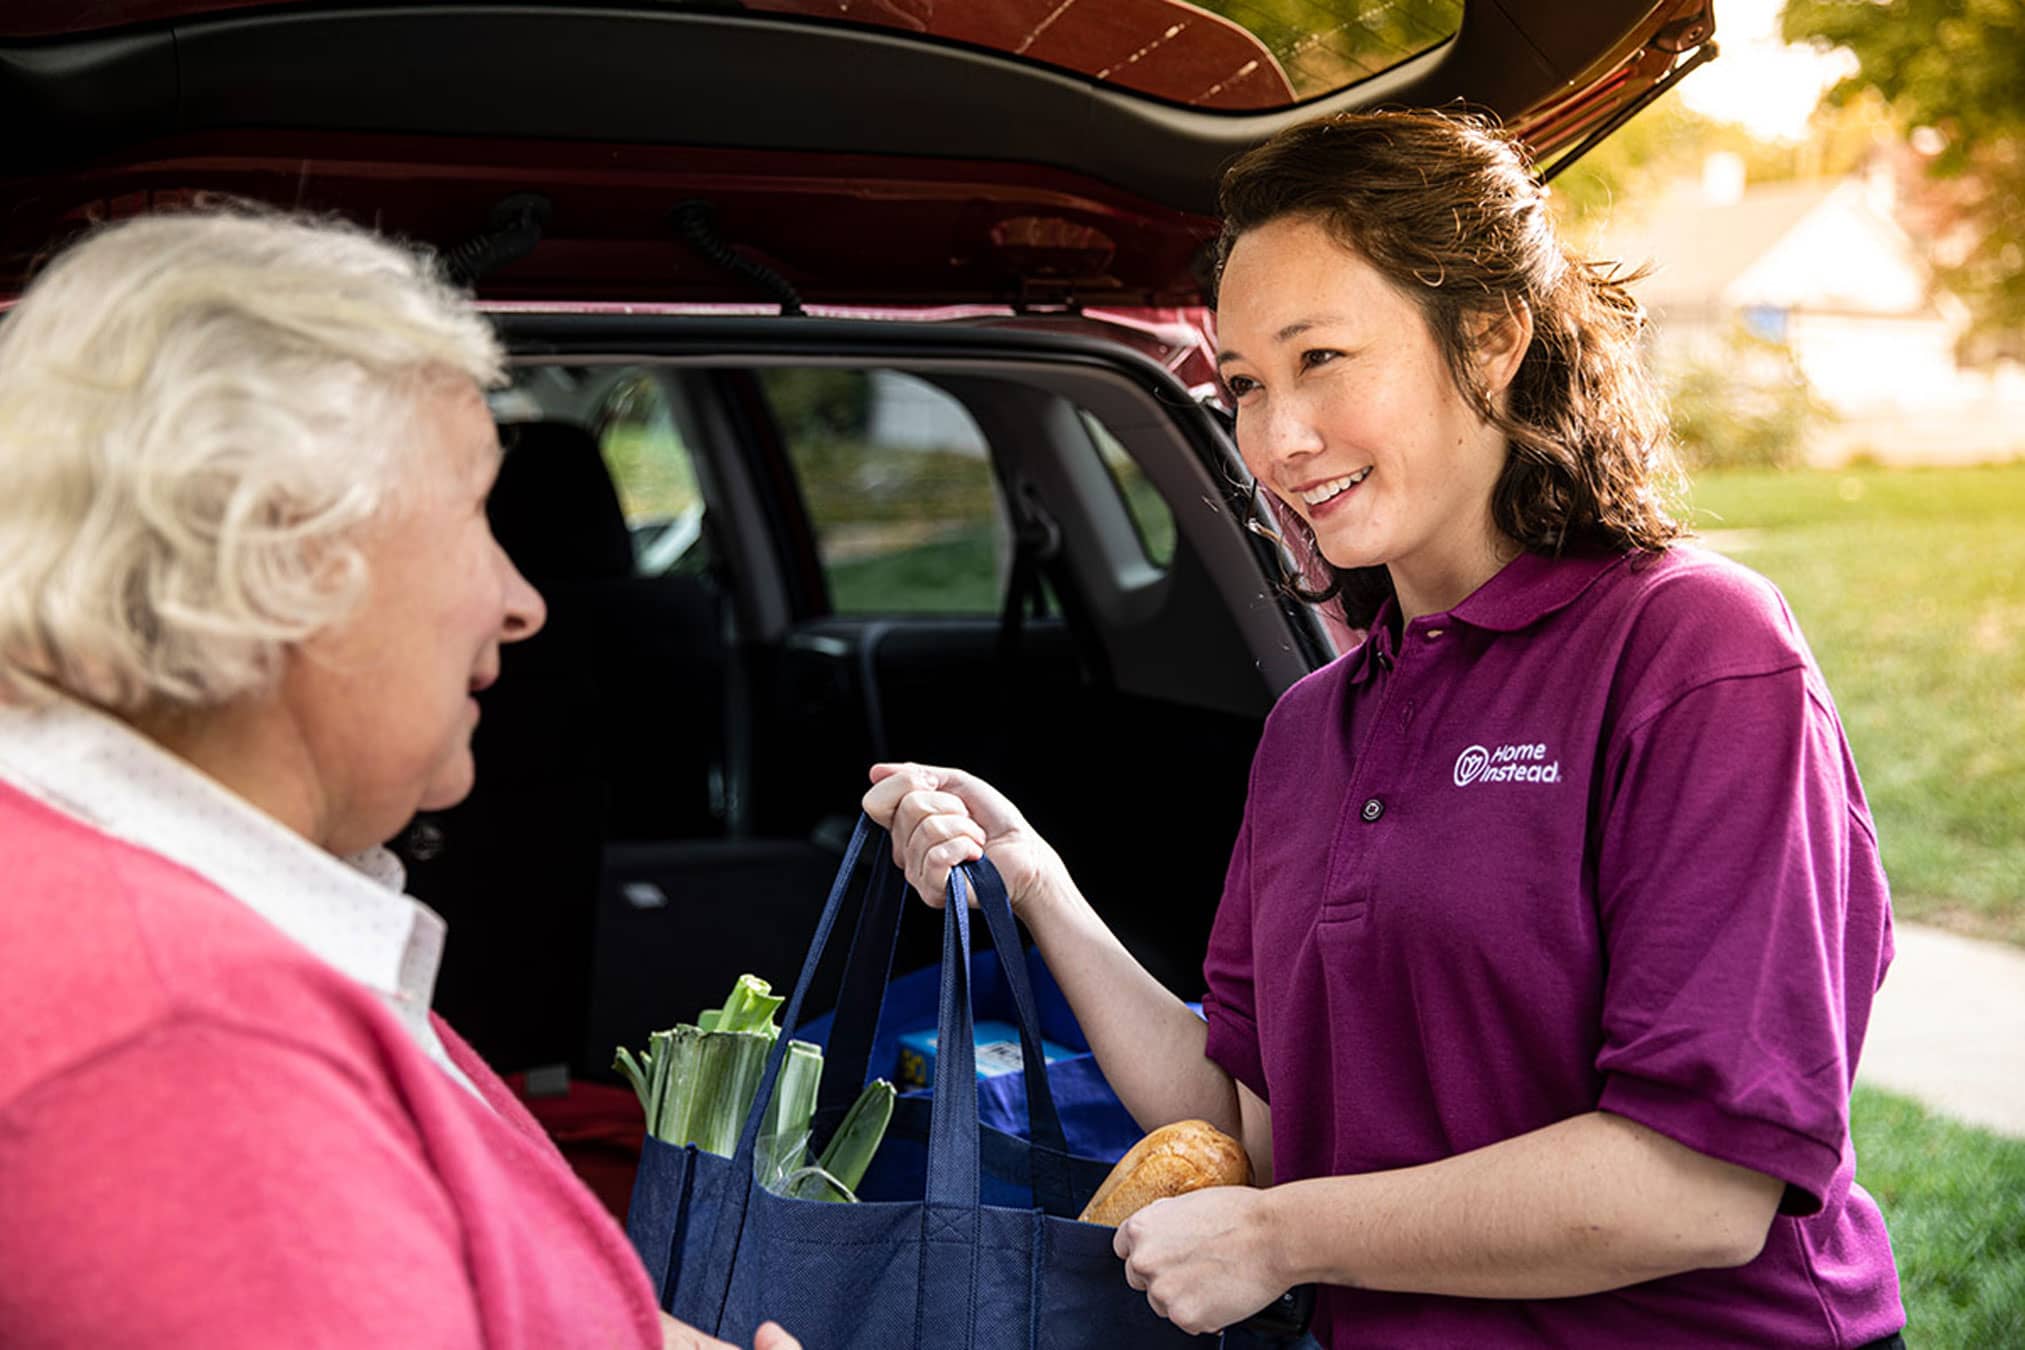 Female Care Professional helping a senior with her bags and assisting with in-home care services.